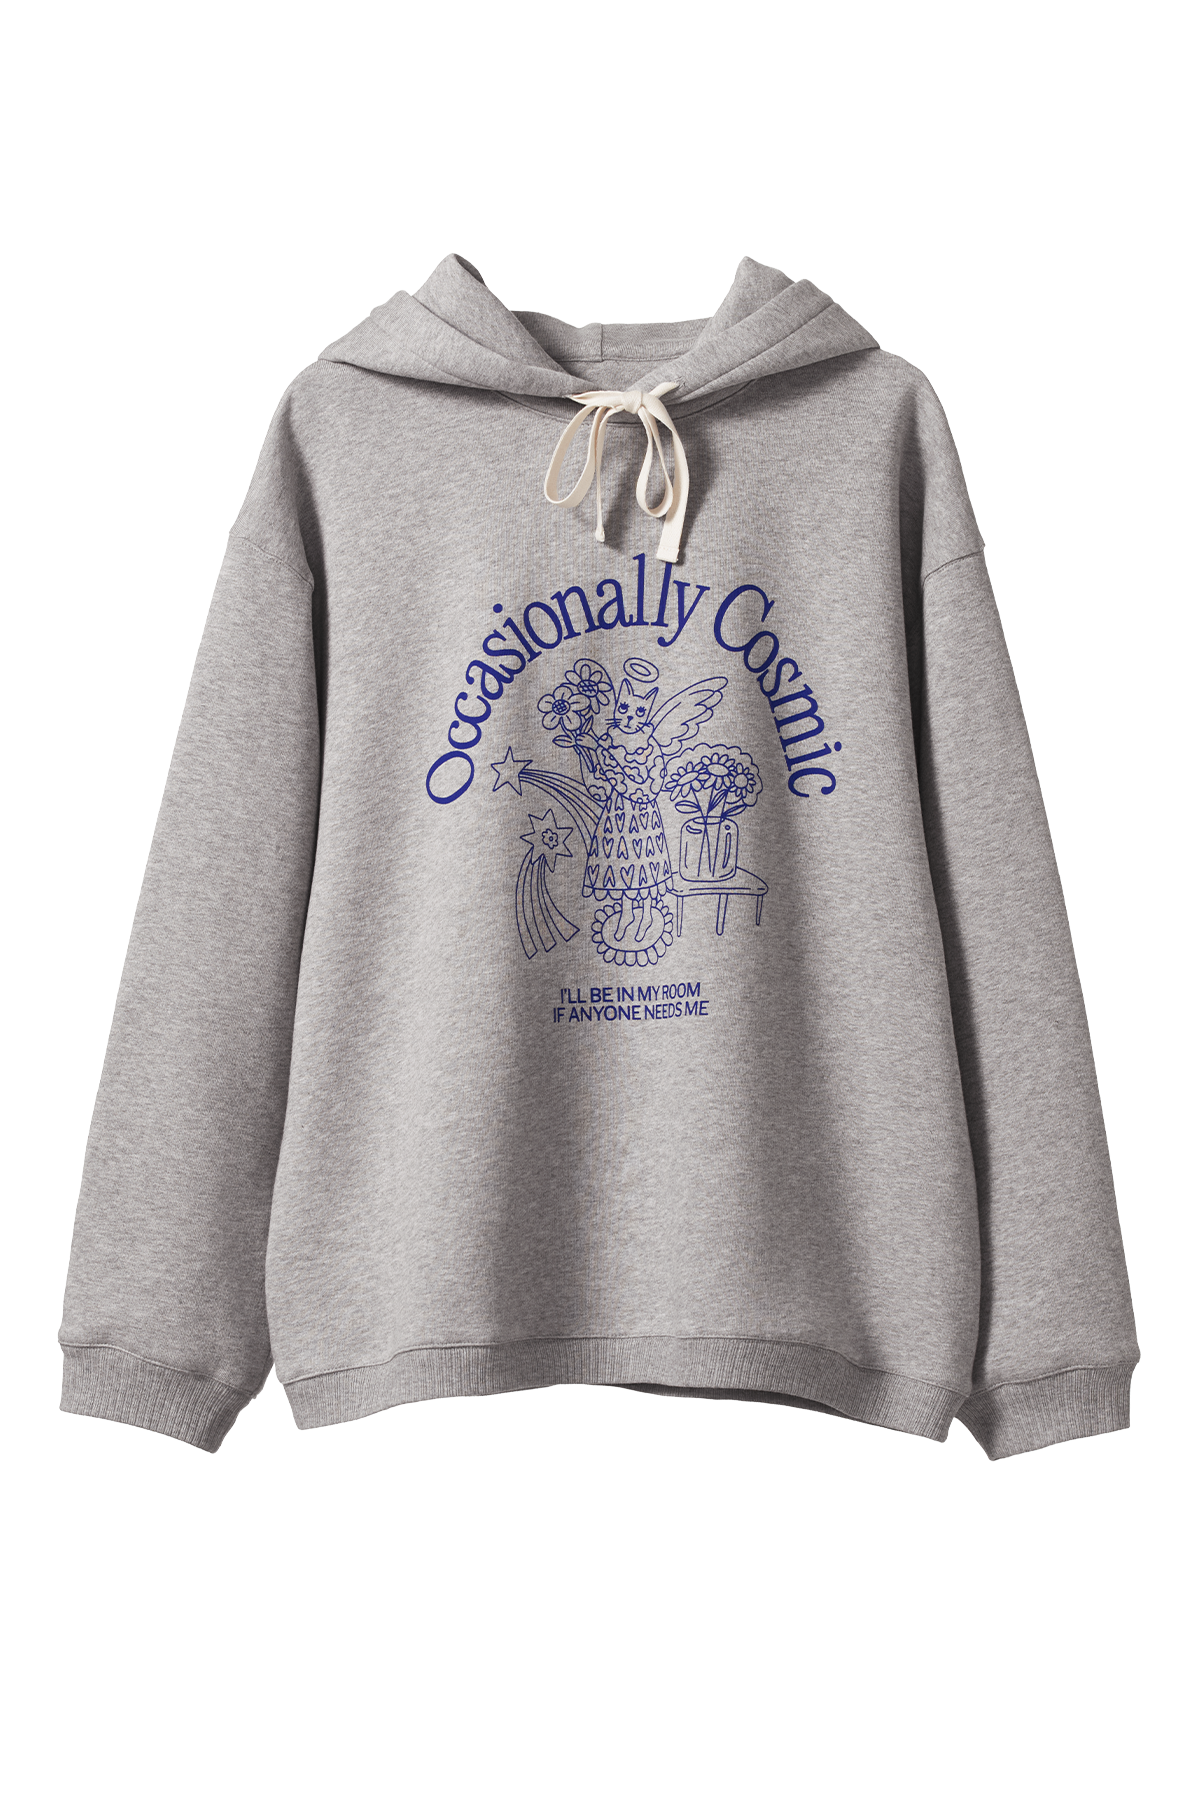 The sky is the limit hoodie